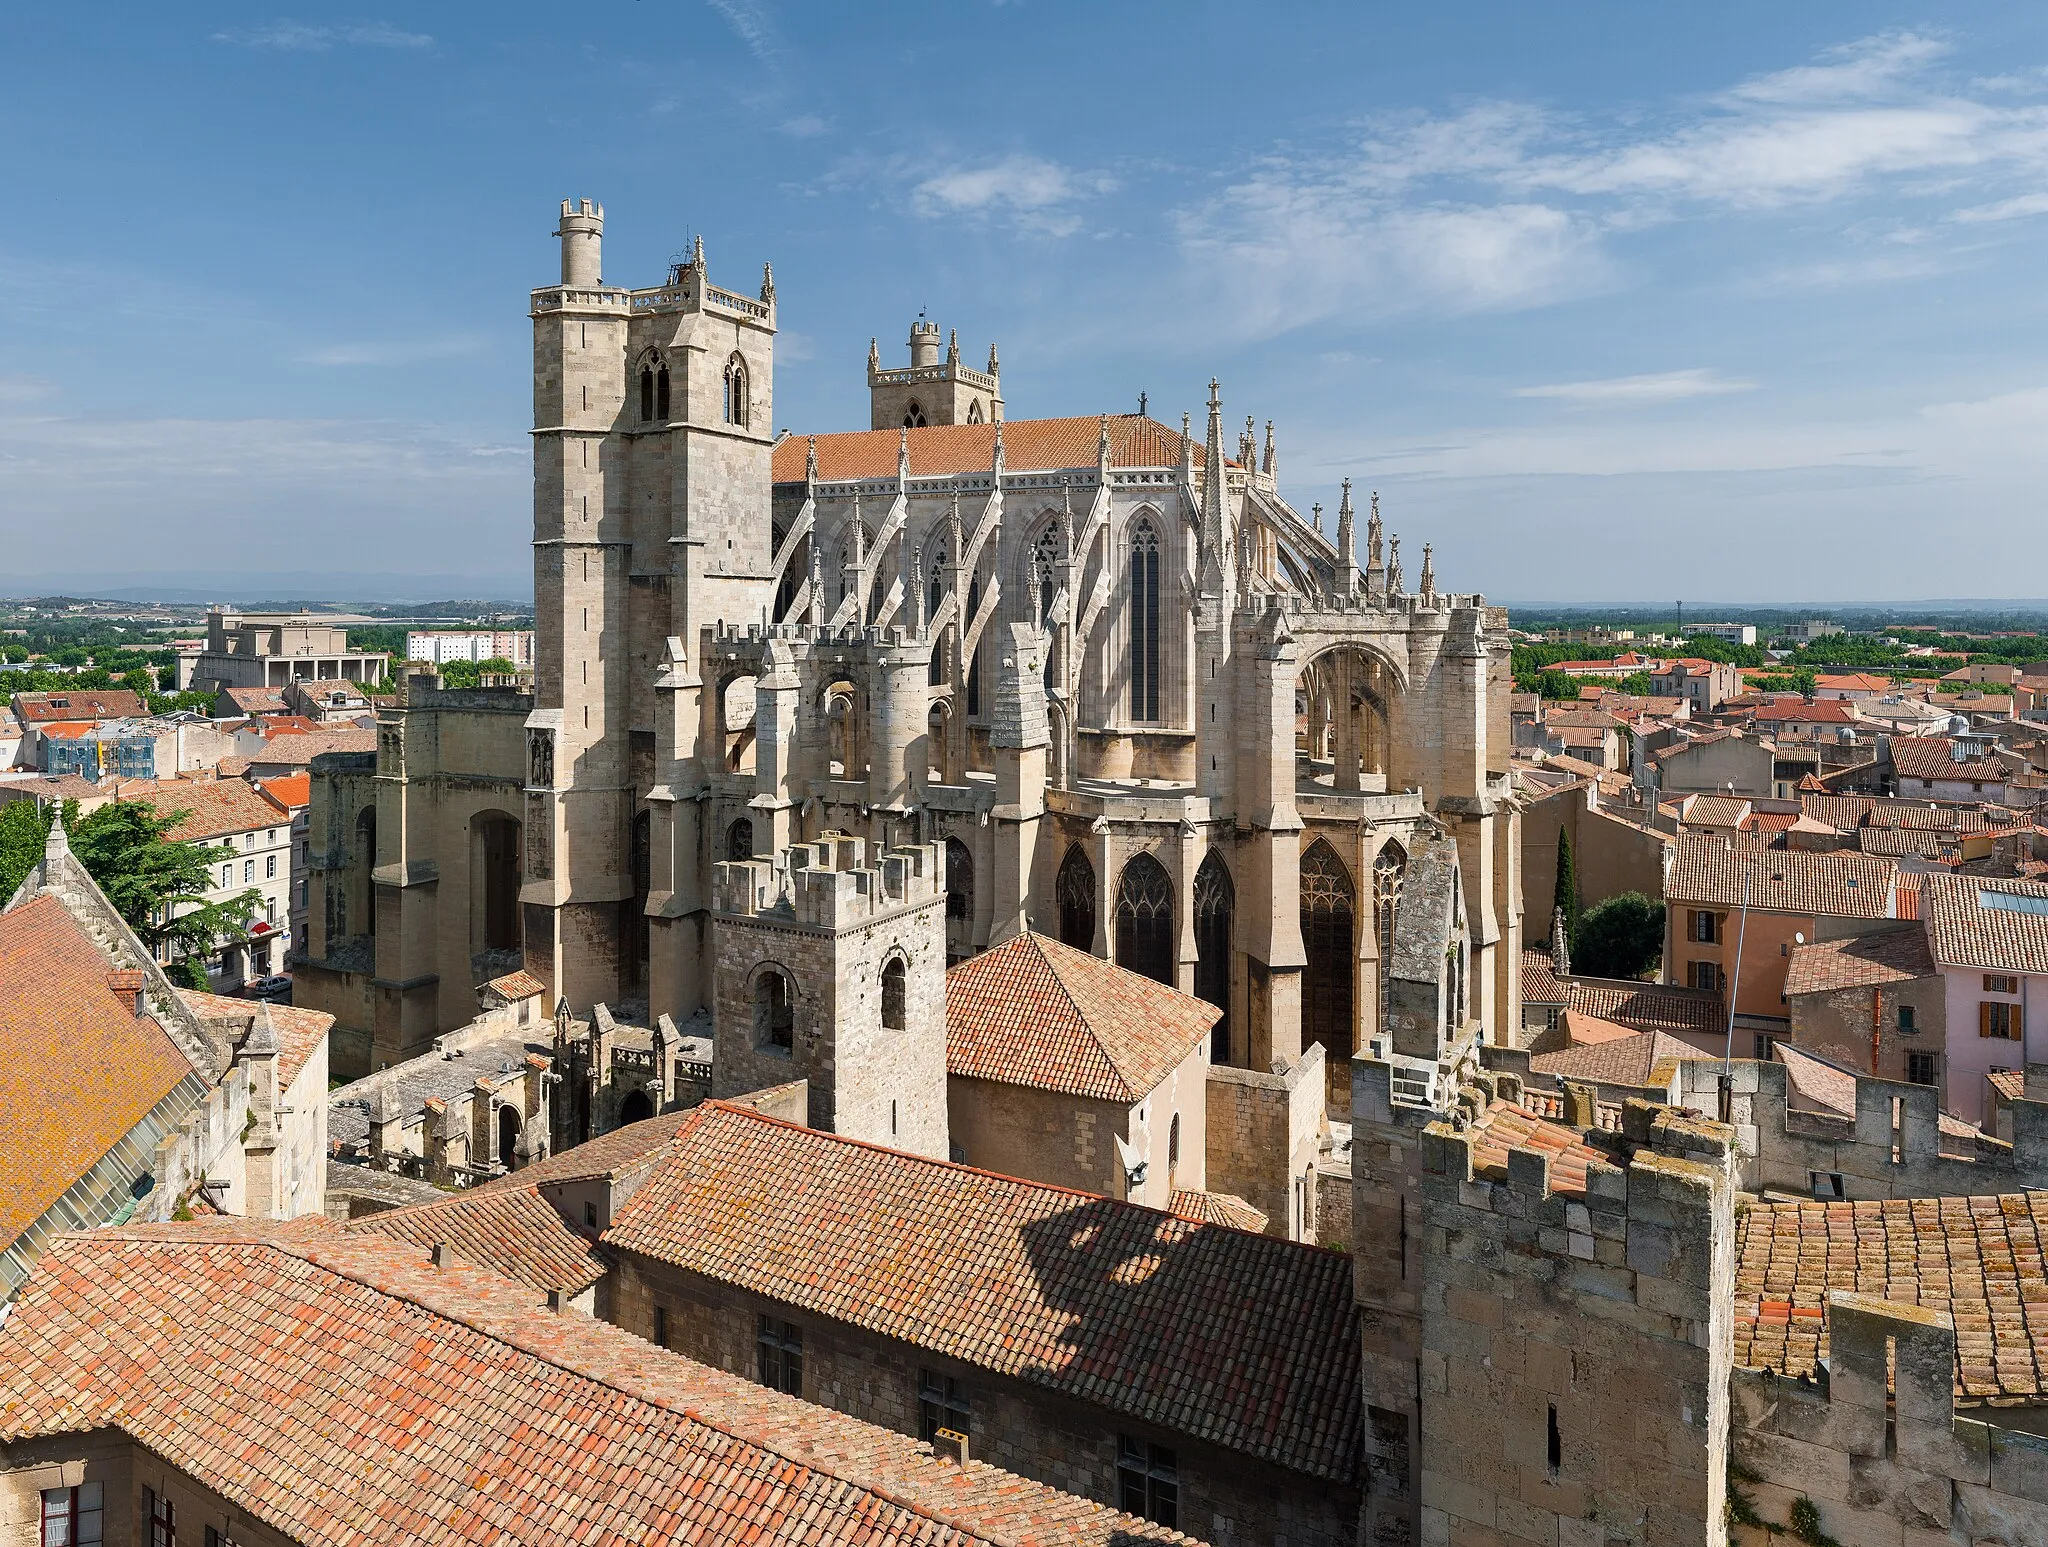 Photo showing: Saint-Just and Saint-Pasteur Cathedral, in Narbonne, south of France, seen from the Gilles Aycelin dungeon. This picture is a mosaic of 9 pictures (3x3), taken at 31mm on a 1.6 crop body, (50mm équiv.), f/8.0, 1/640s and ISO 100. Stitching was done with Hugin and Enblend. Resulting horizontal FOV is 90°.